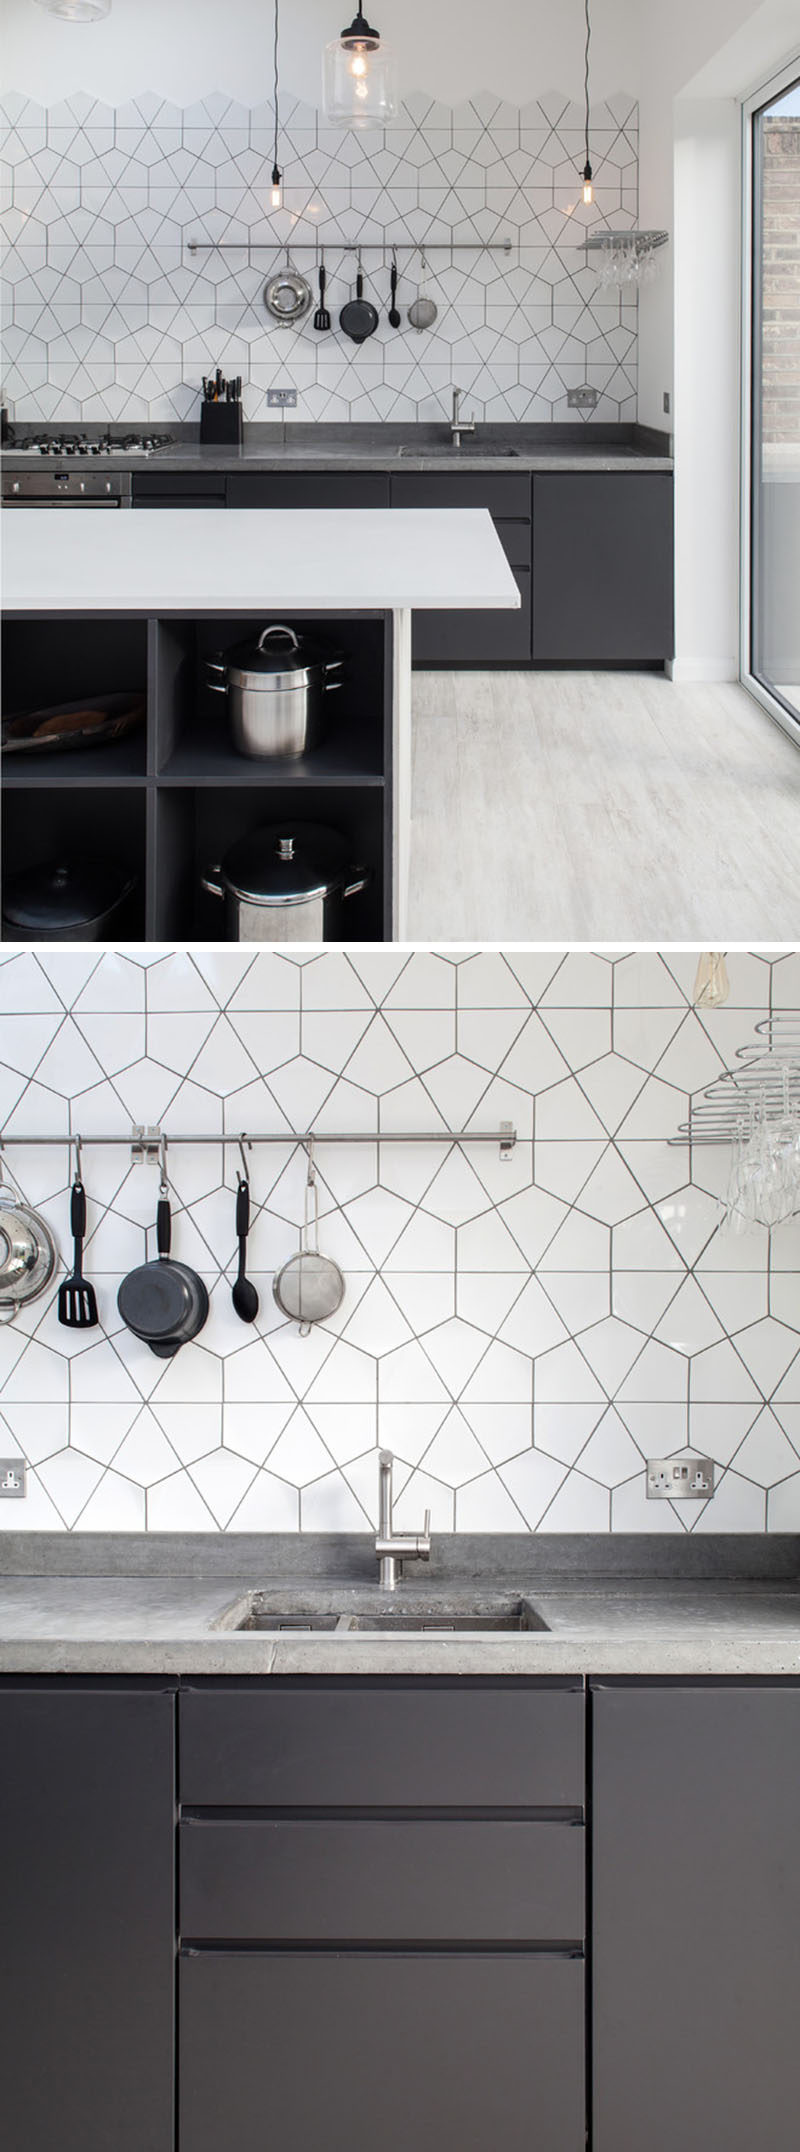 9 Inspirational Pictures Of Kitchens With Geometric Tiles // The white tiles and dark grout are in keeping with the rest of the color scheme in this concrete, grey, and white kitchen.